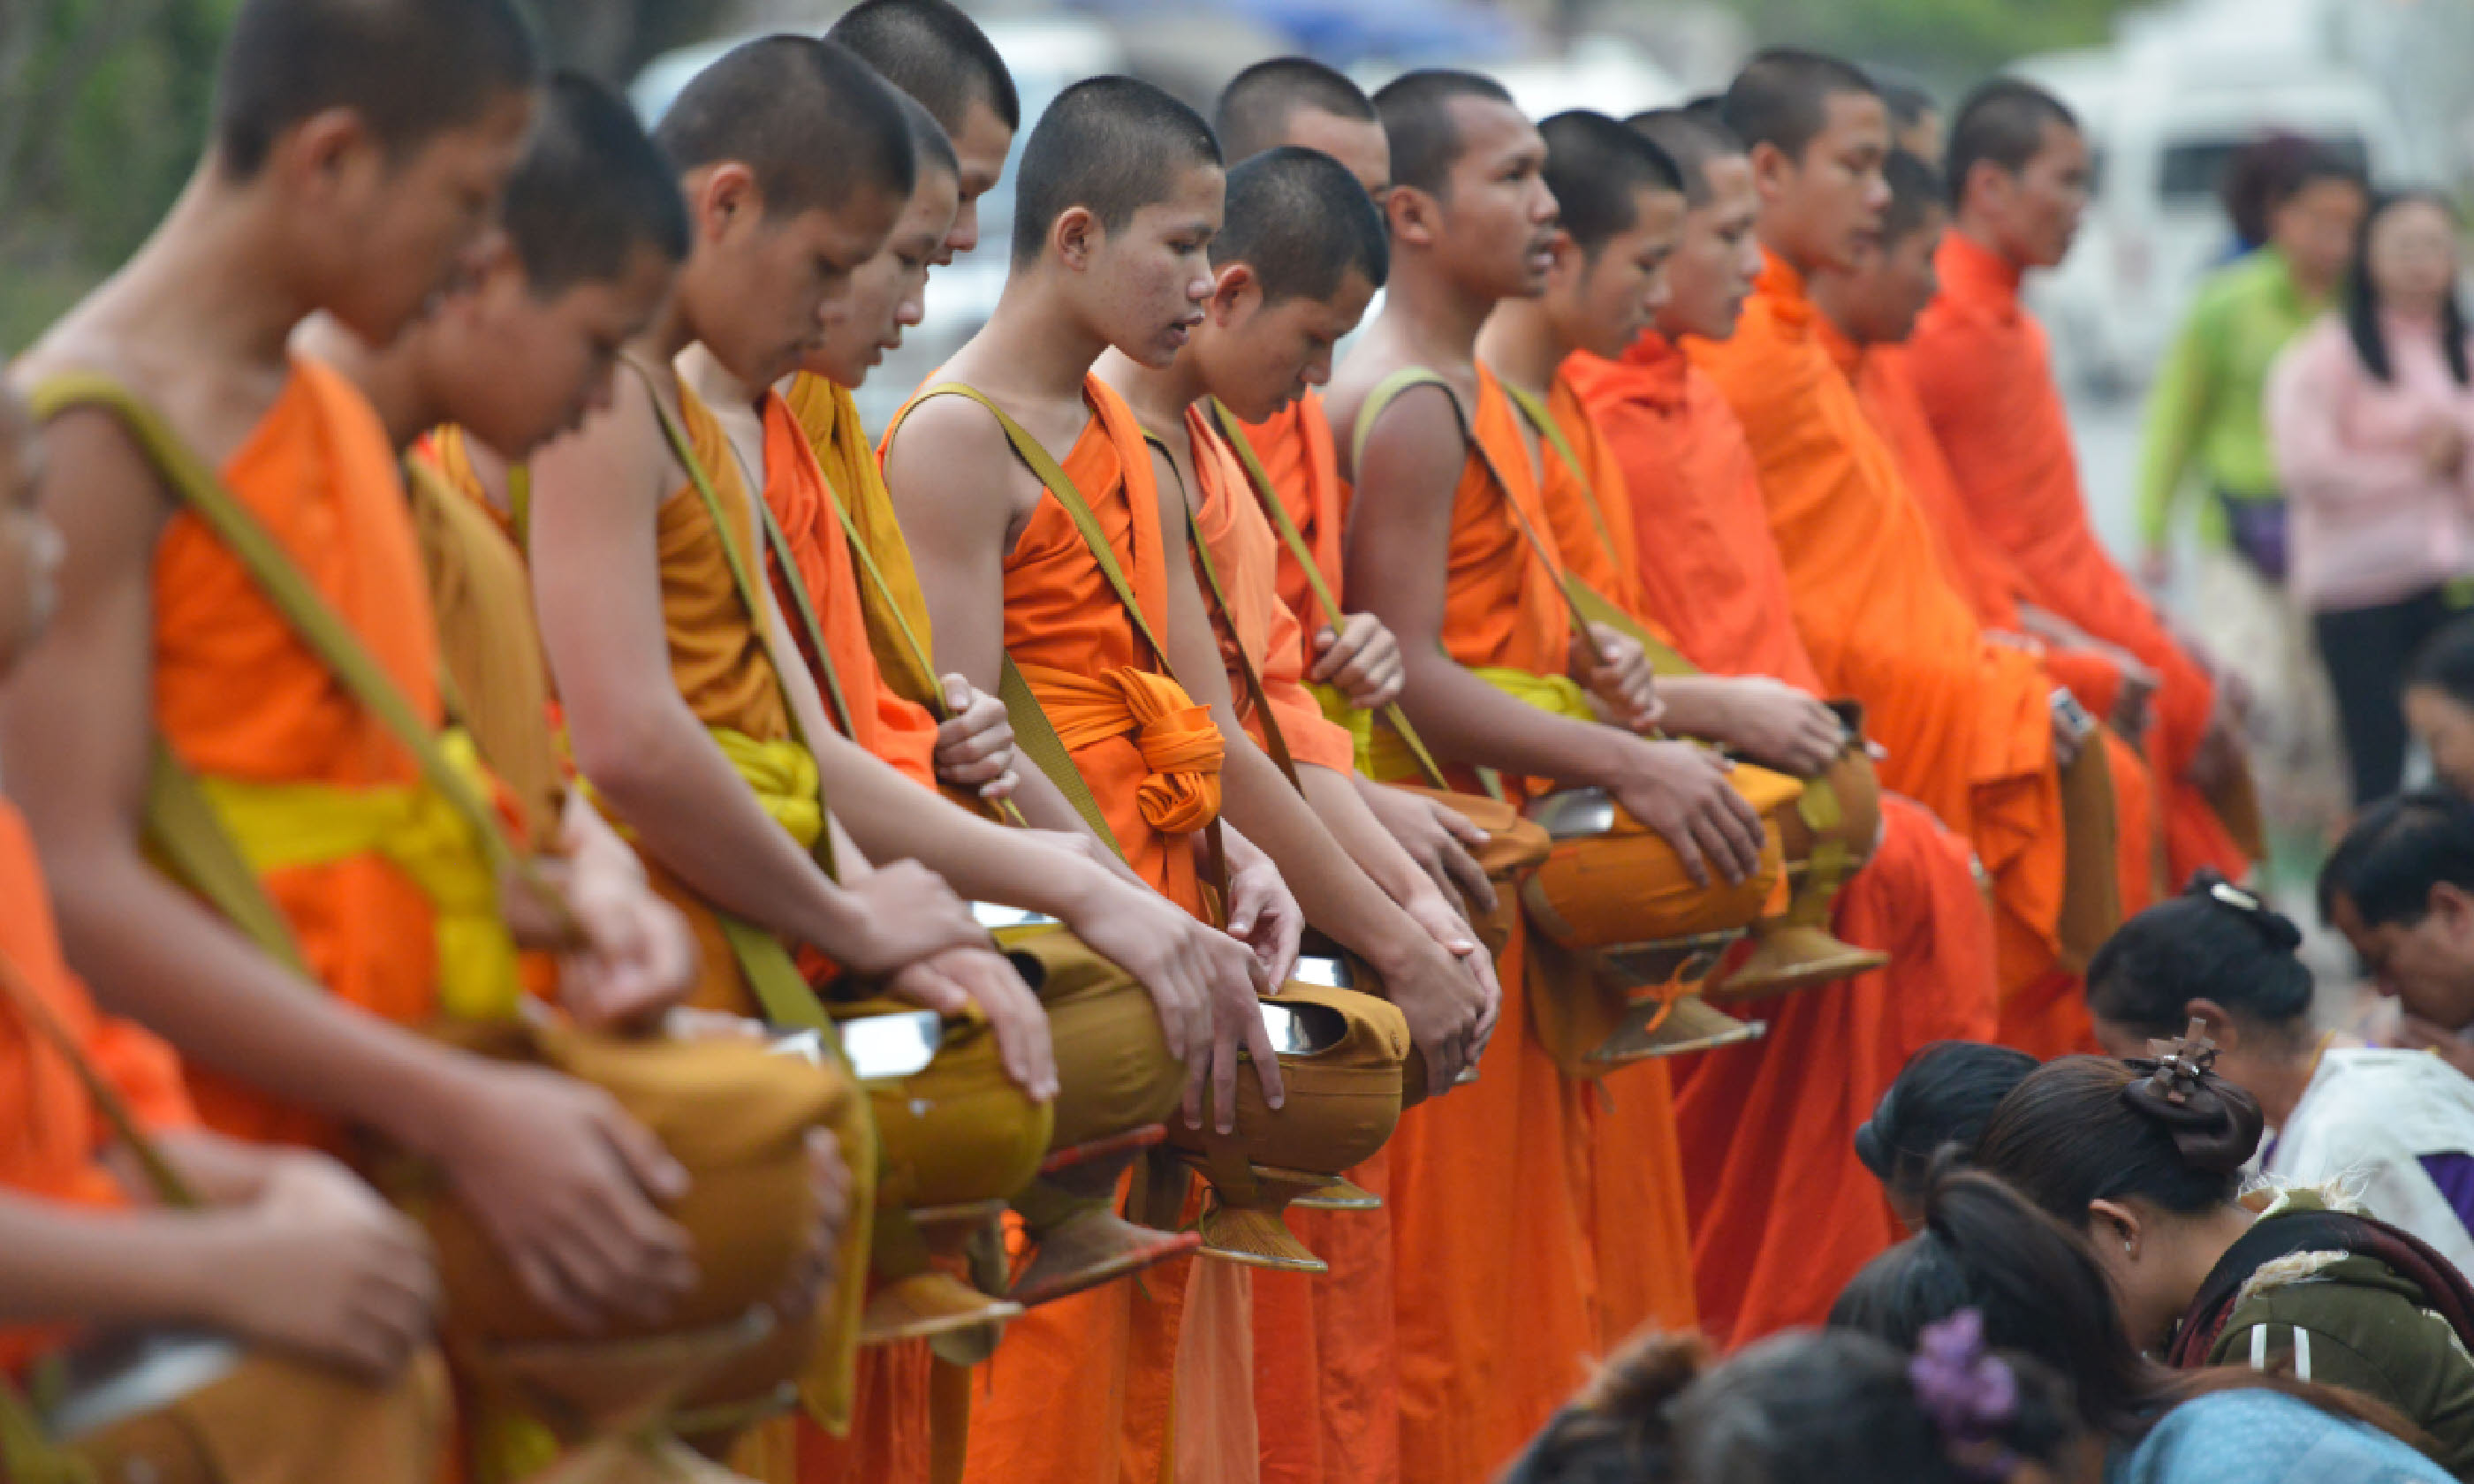 Monks collenting alms, Laos (Shutterstock)